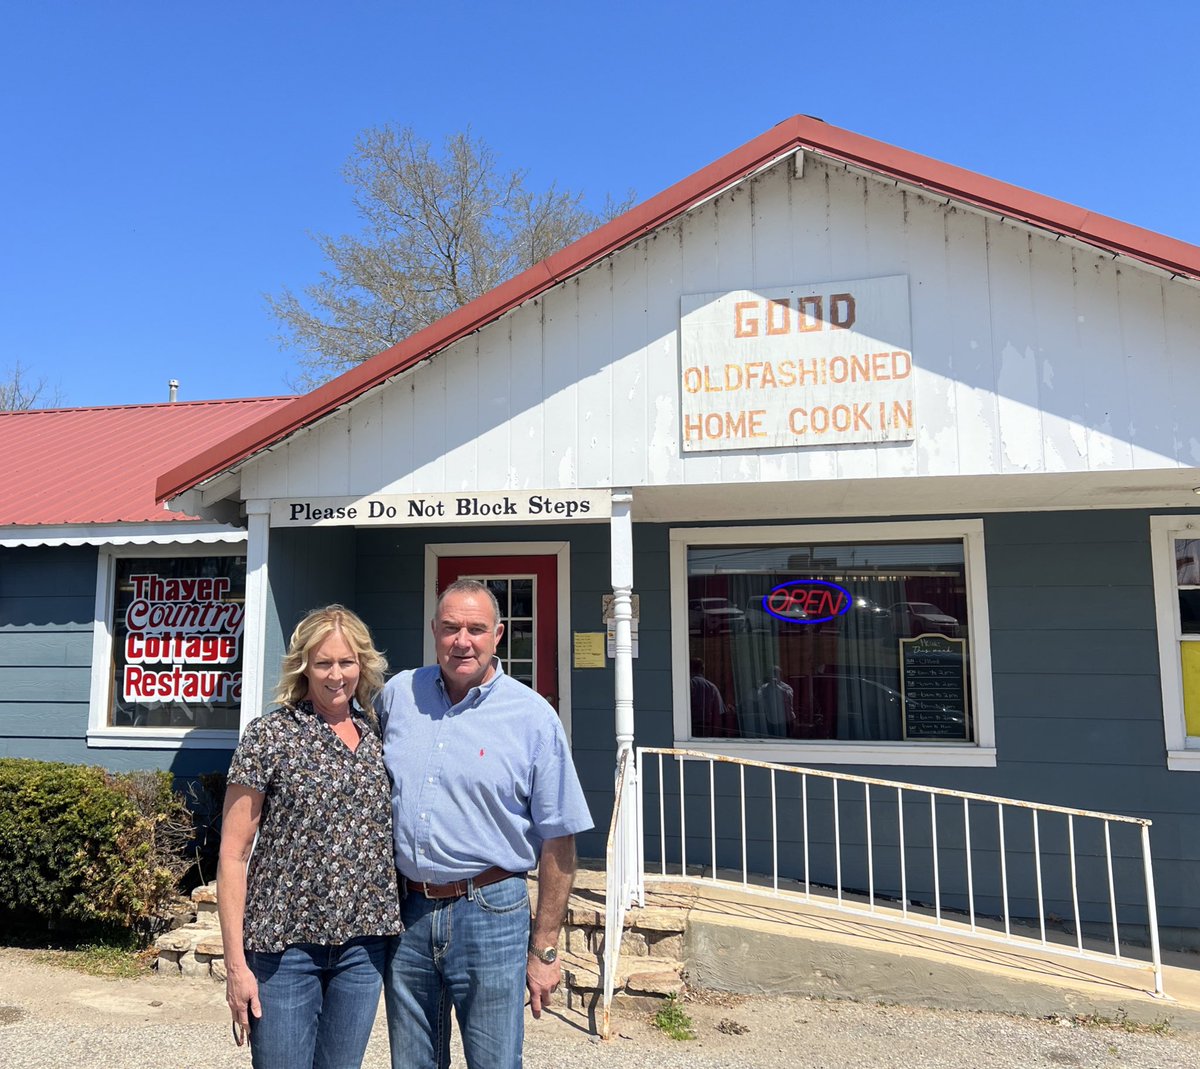 Stopped for lunch at the Country Cottage in Thayer today. Wednesday's lunch special — fried chicken. Great food and great people!